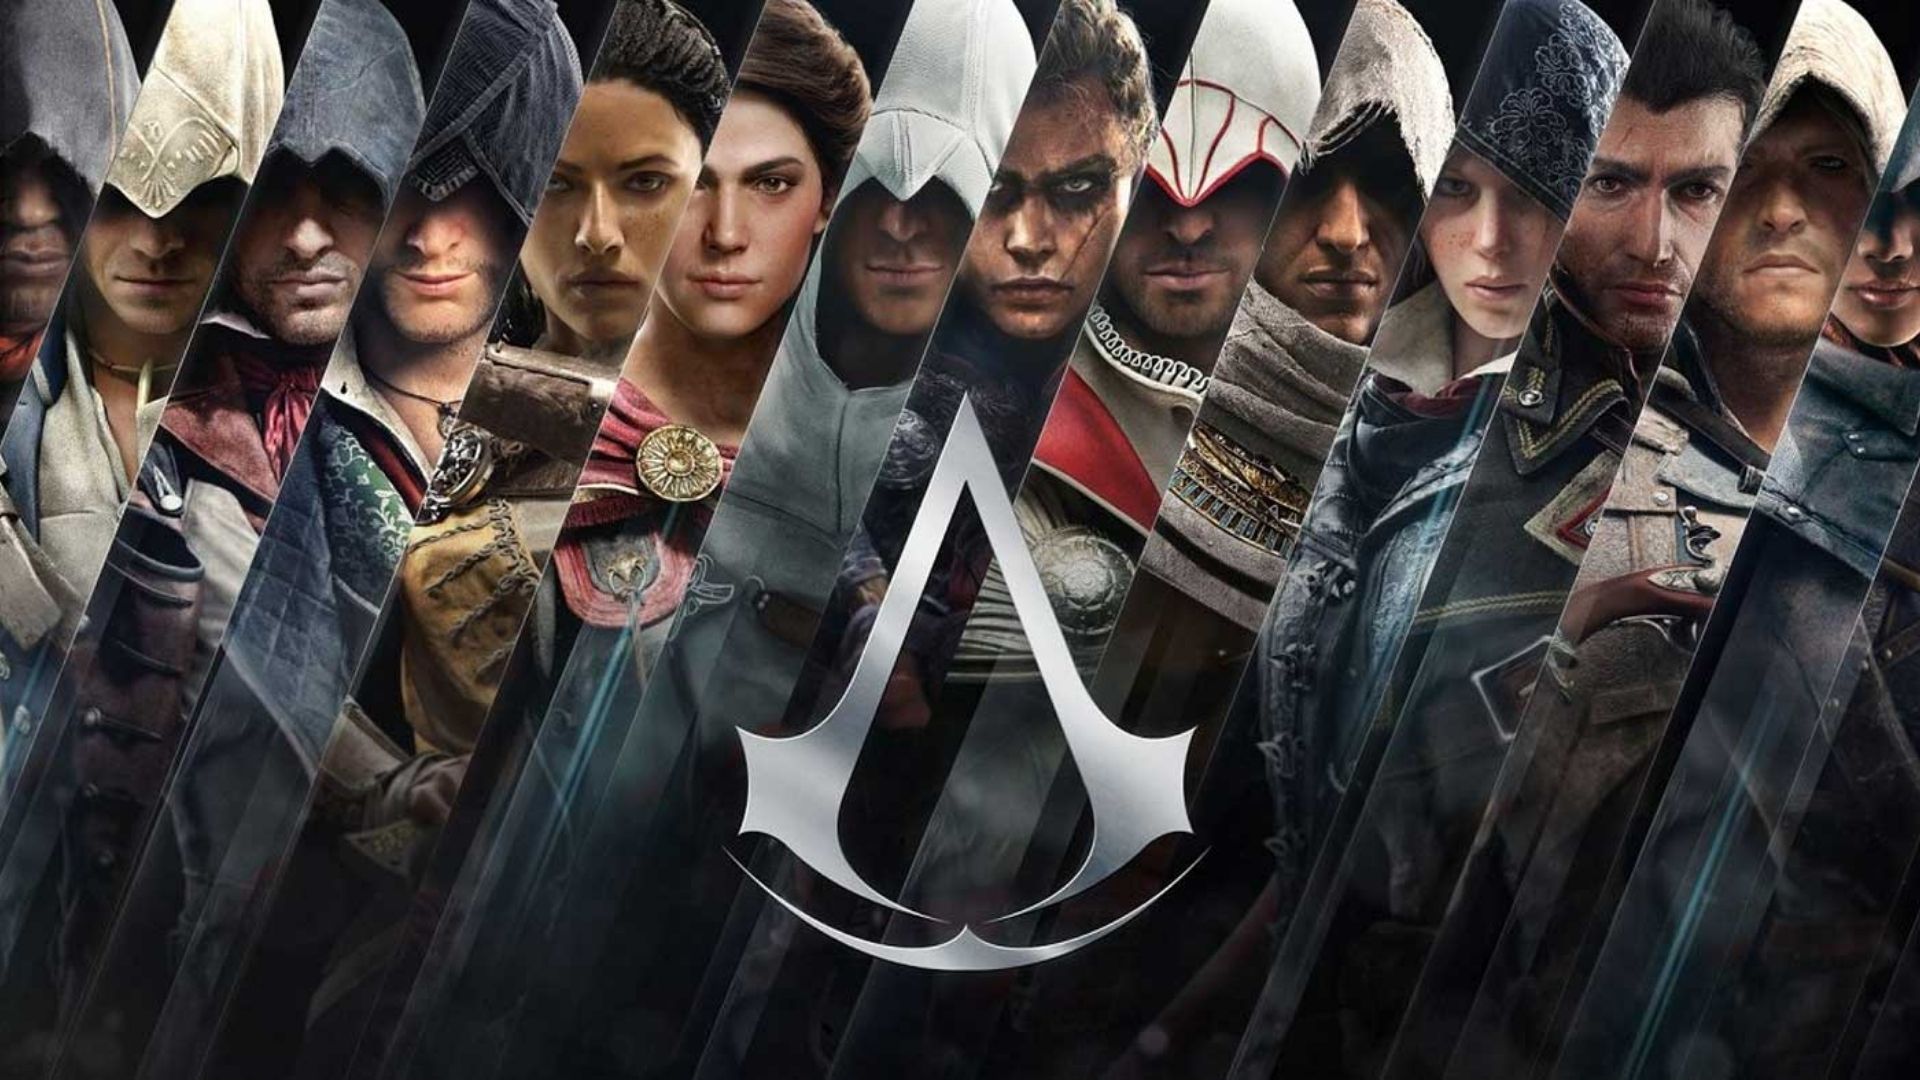 Assassin's Creed Infinity will have multiple settings